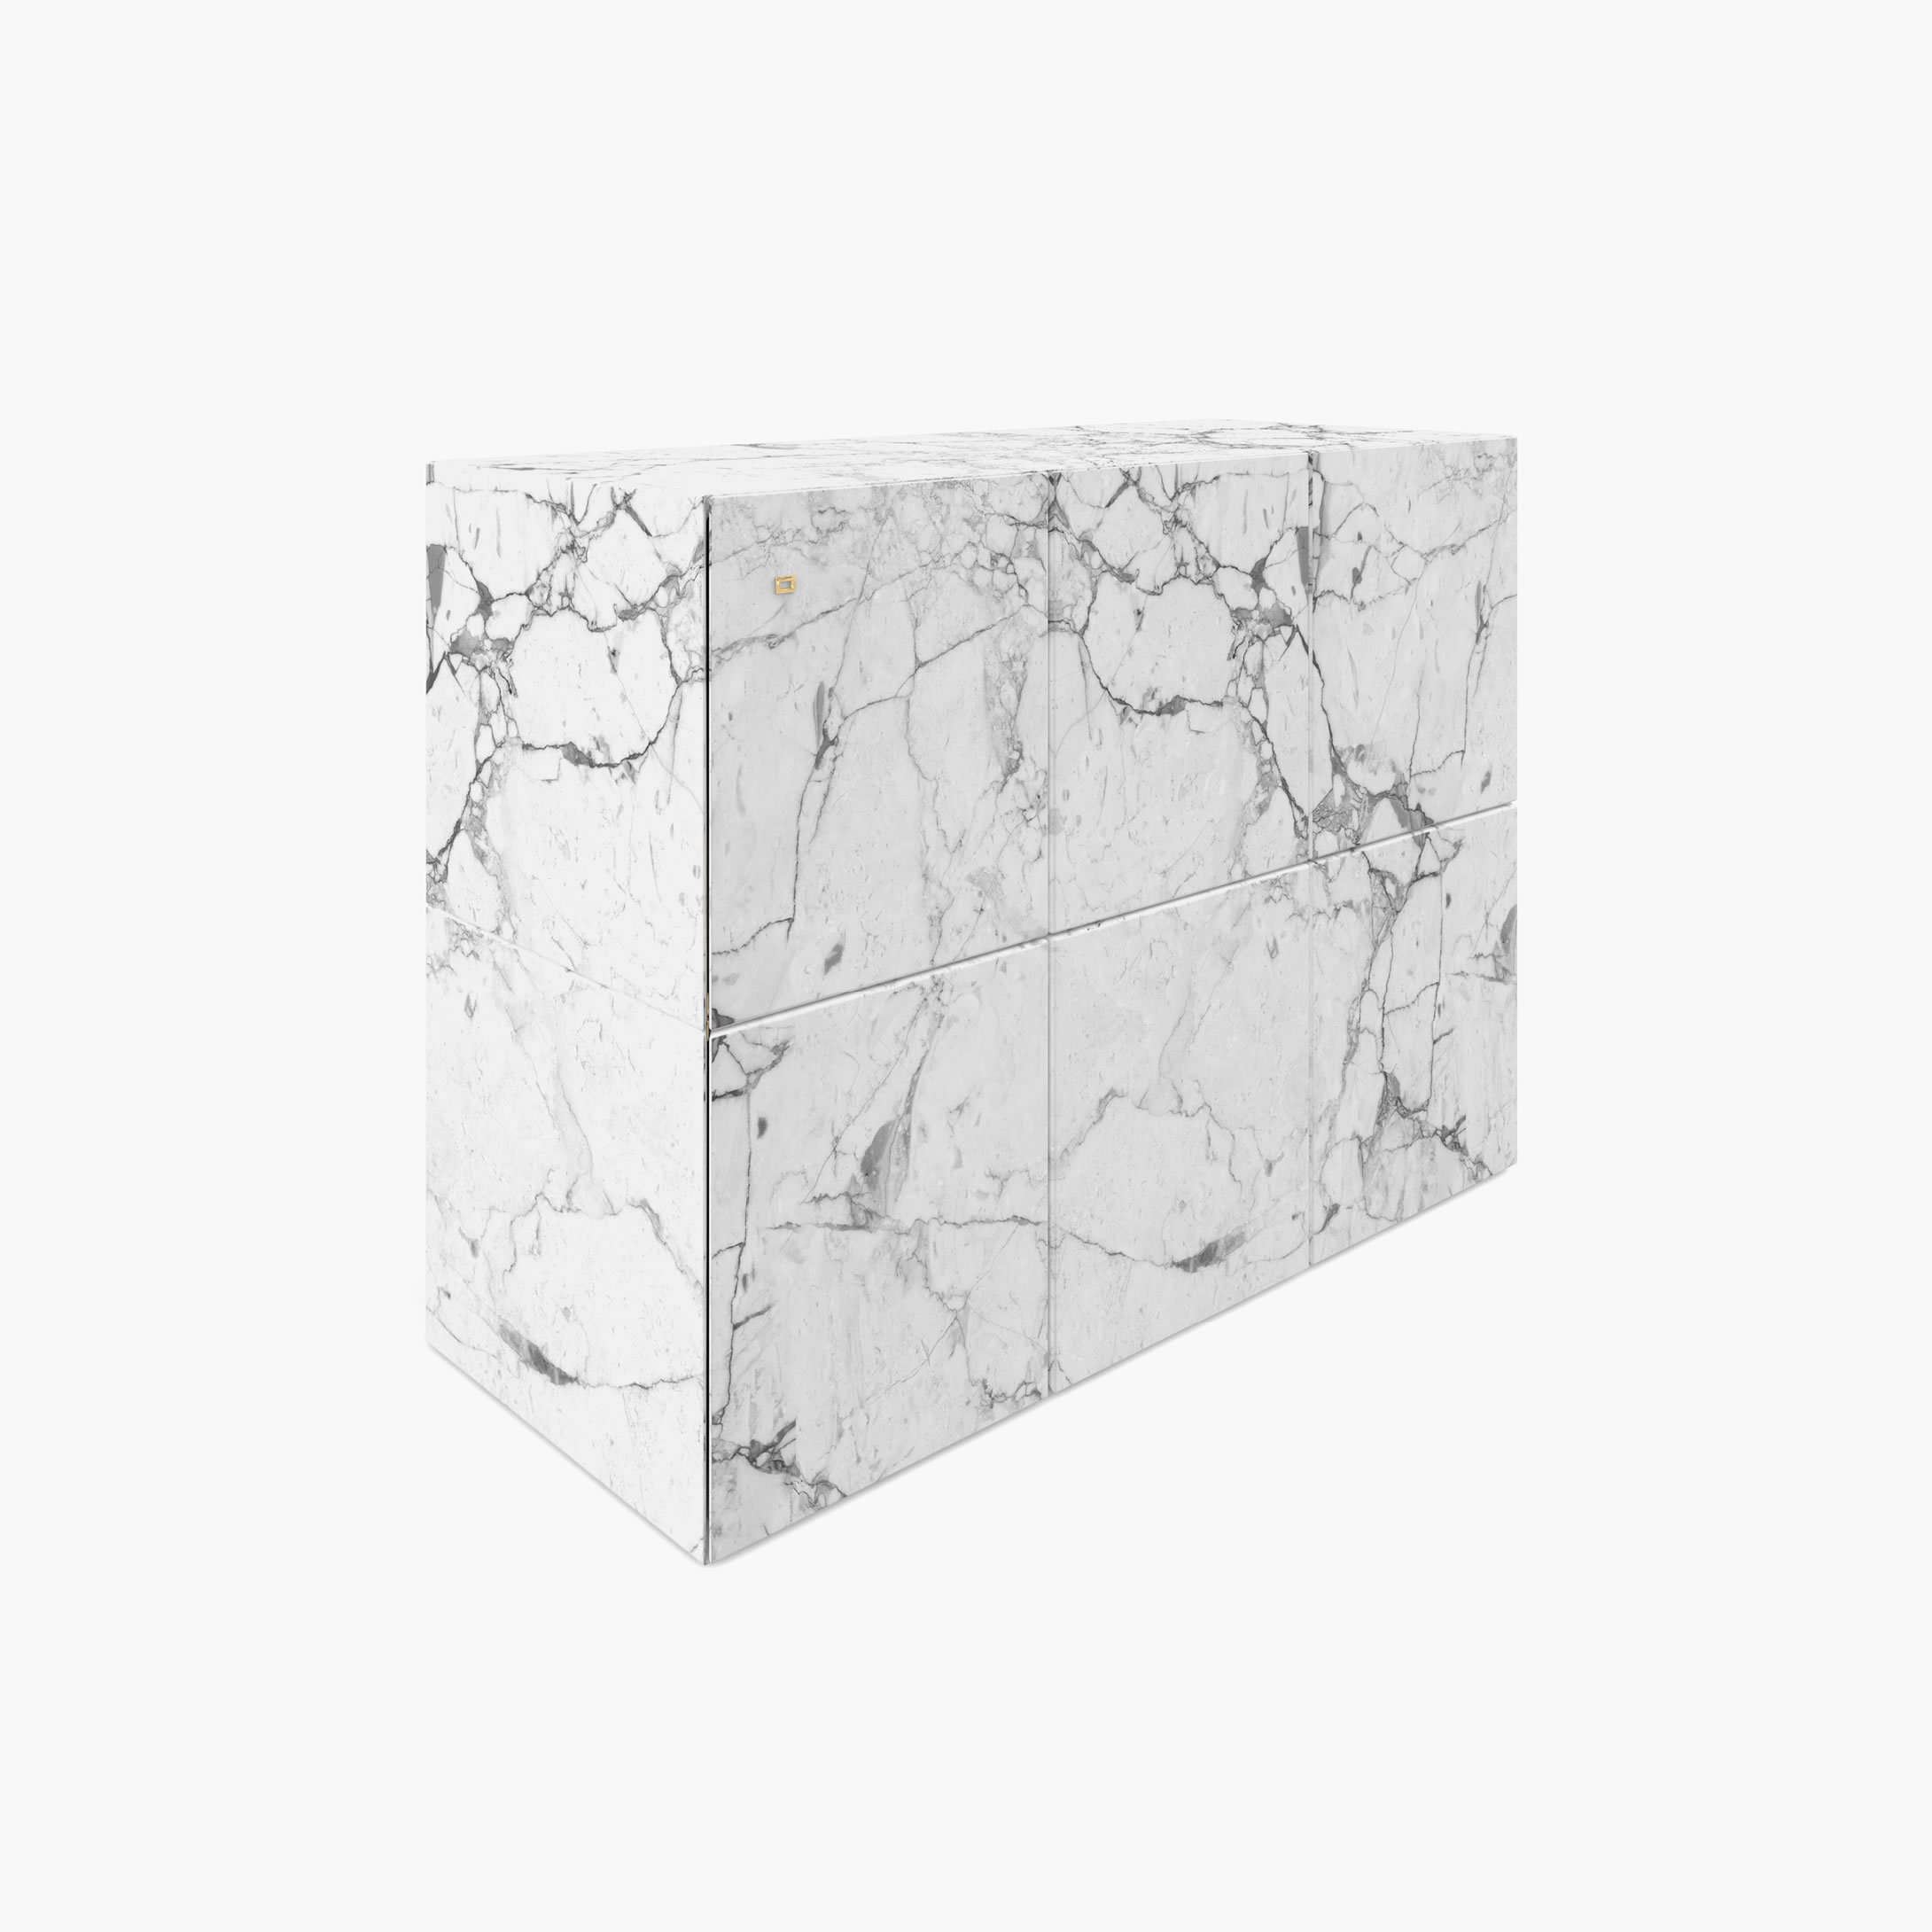 Sideboard of cubes White Arabescato Marble hand crafted Living Room creation Consoles  Sideboards FS 24 FELIX SCHWAKE